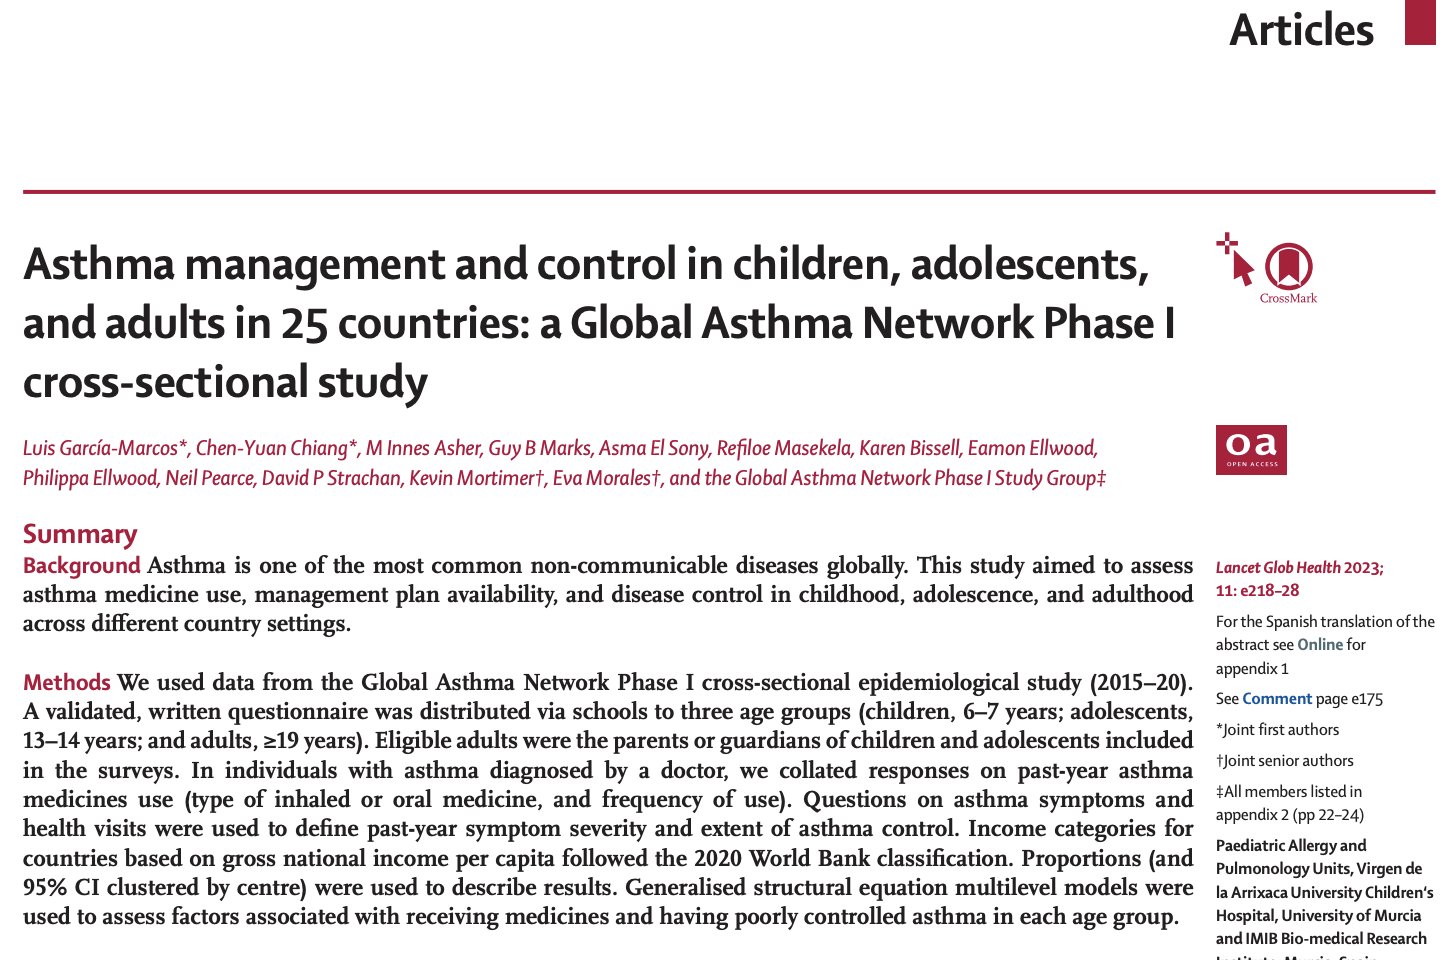 Asthma management and control in children, adolescents, and adults in 25 countries: a Global Asthma Network Phase I cross-sectional study